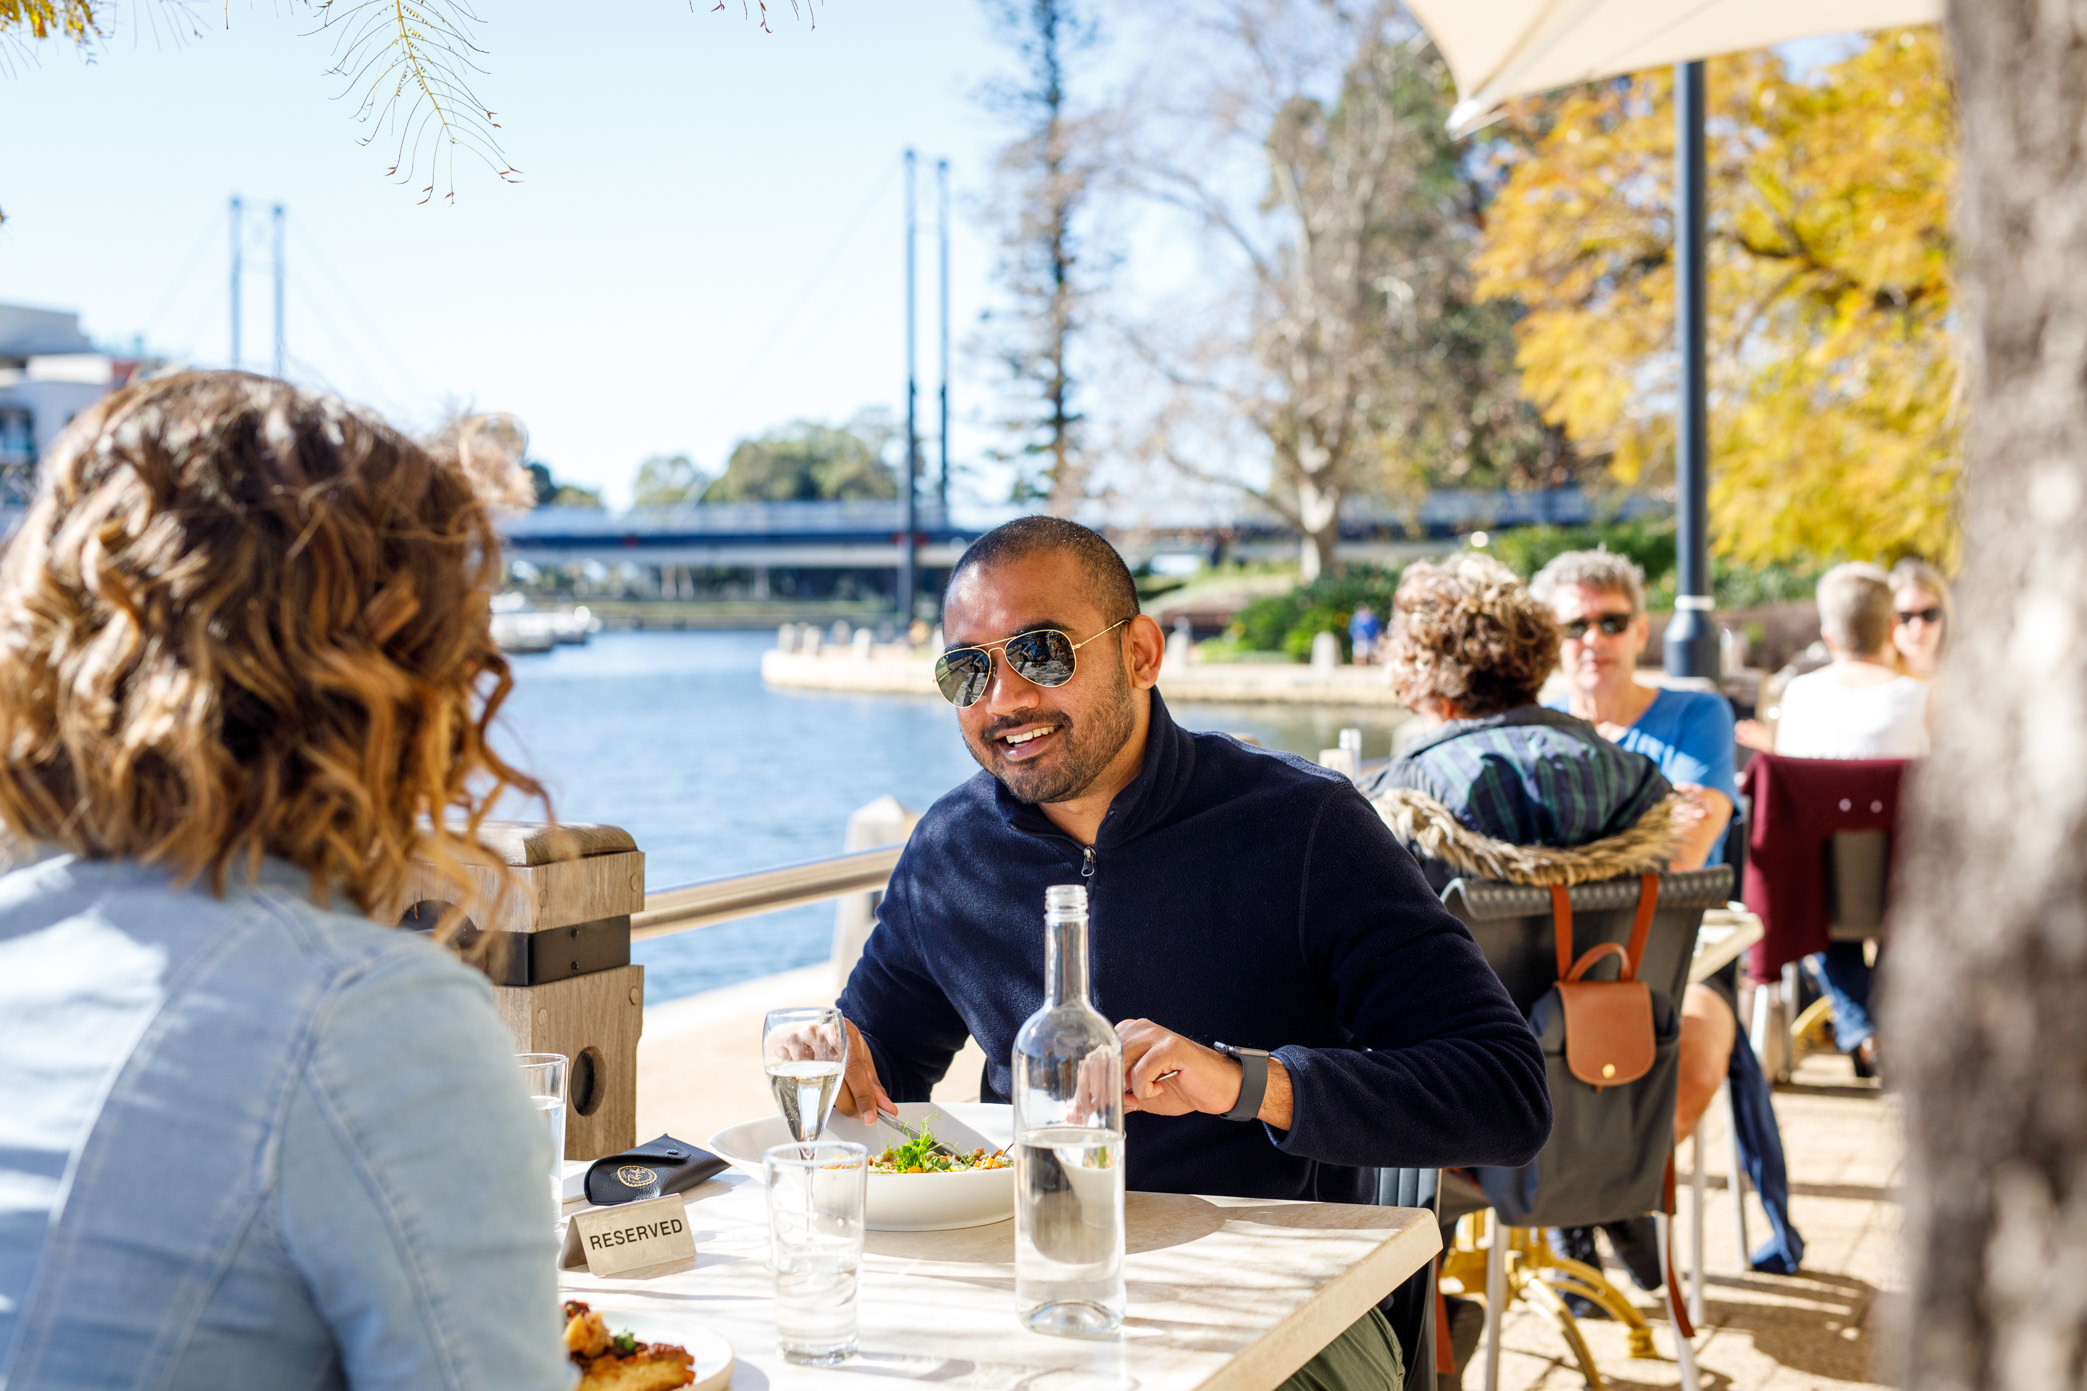 Outdoor diners near Claisebrook Cove